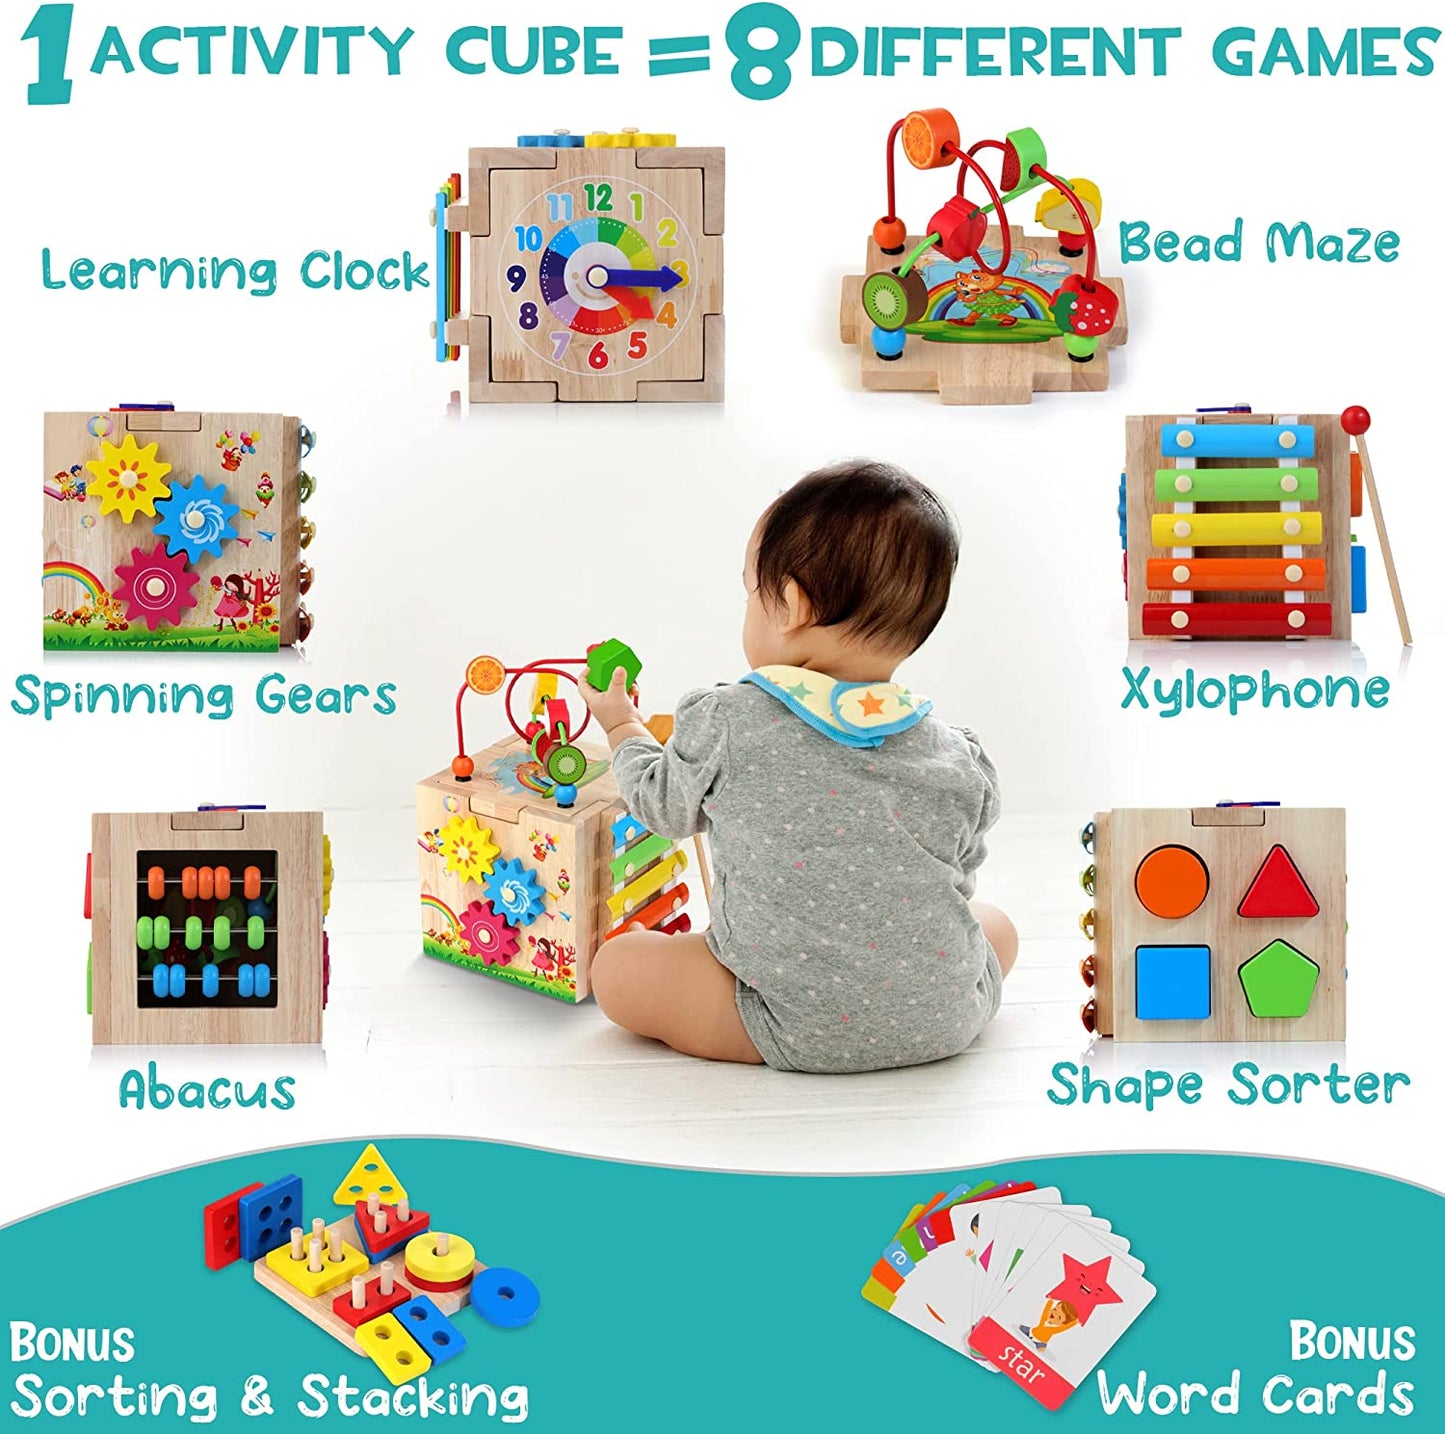 Wooden Activity Cube, 8-in-1 Toys Gift Set for 12+ Months Boys & Girls, Educational Learning Toys for Toddlers Age 1-2, One Year Old Baby Birthday Gifts, Bonus Sort & Stack Board